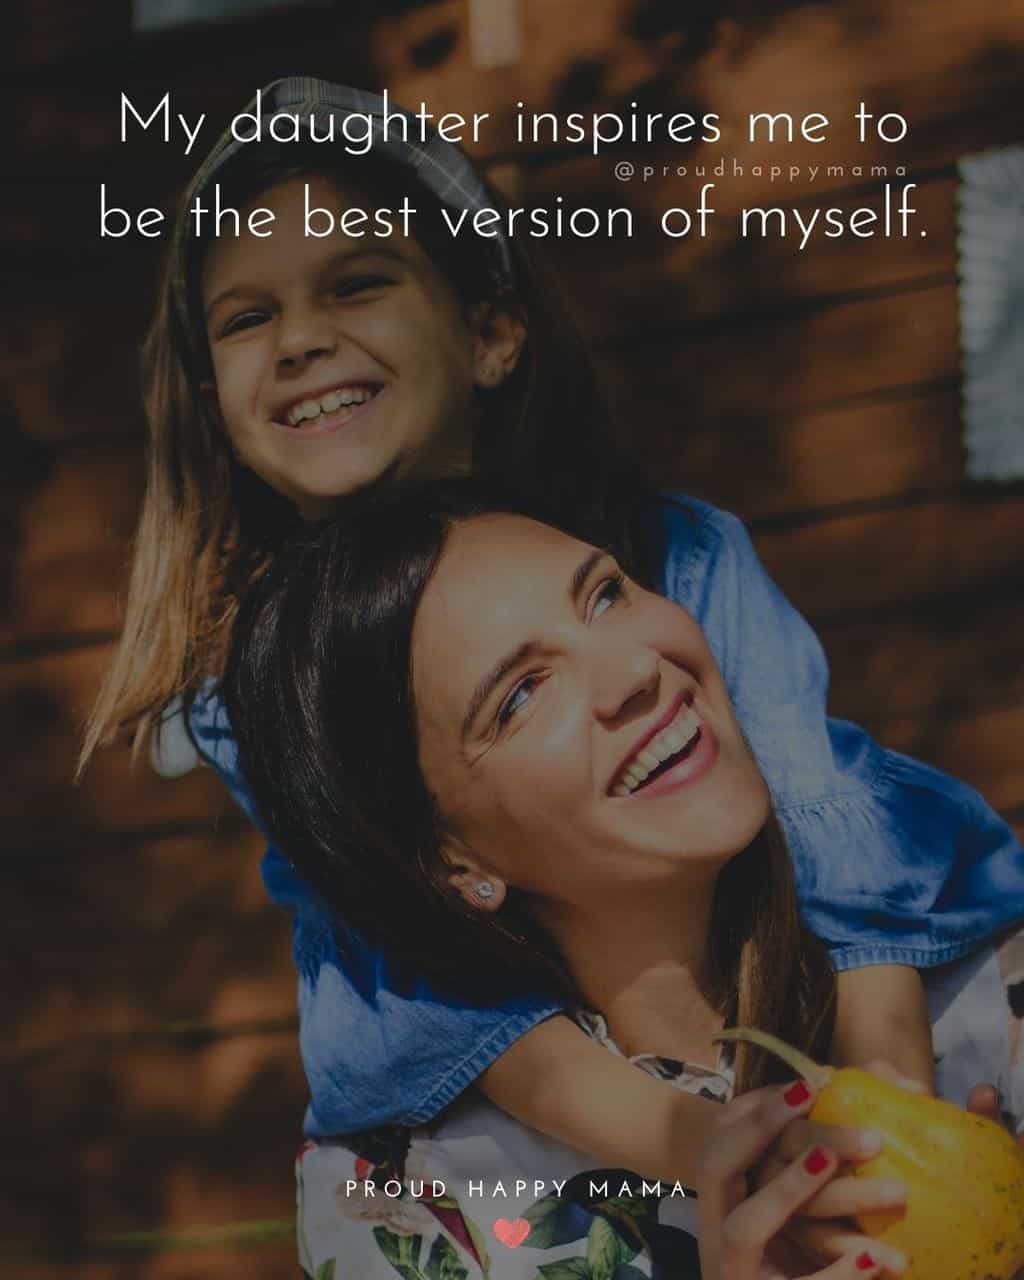 daughter quote - ‘My daughter inspires me to be the best version of myself.’